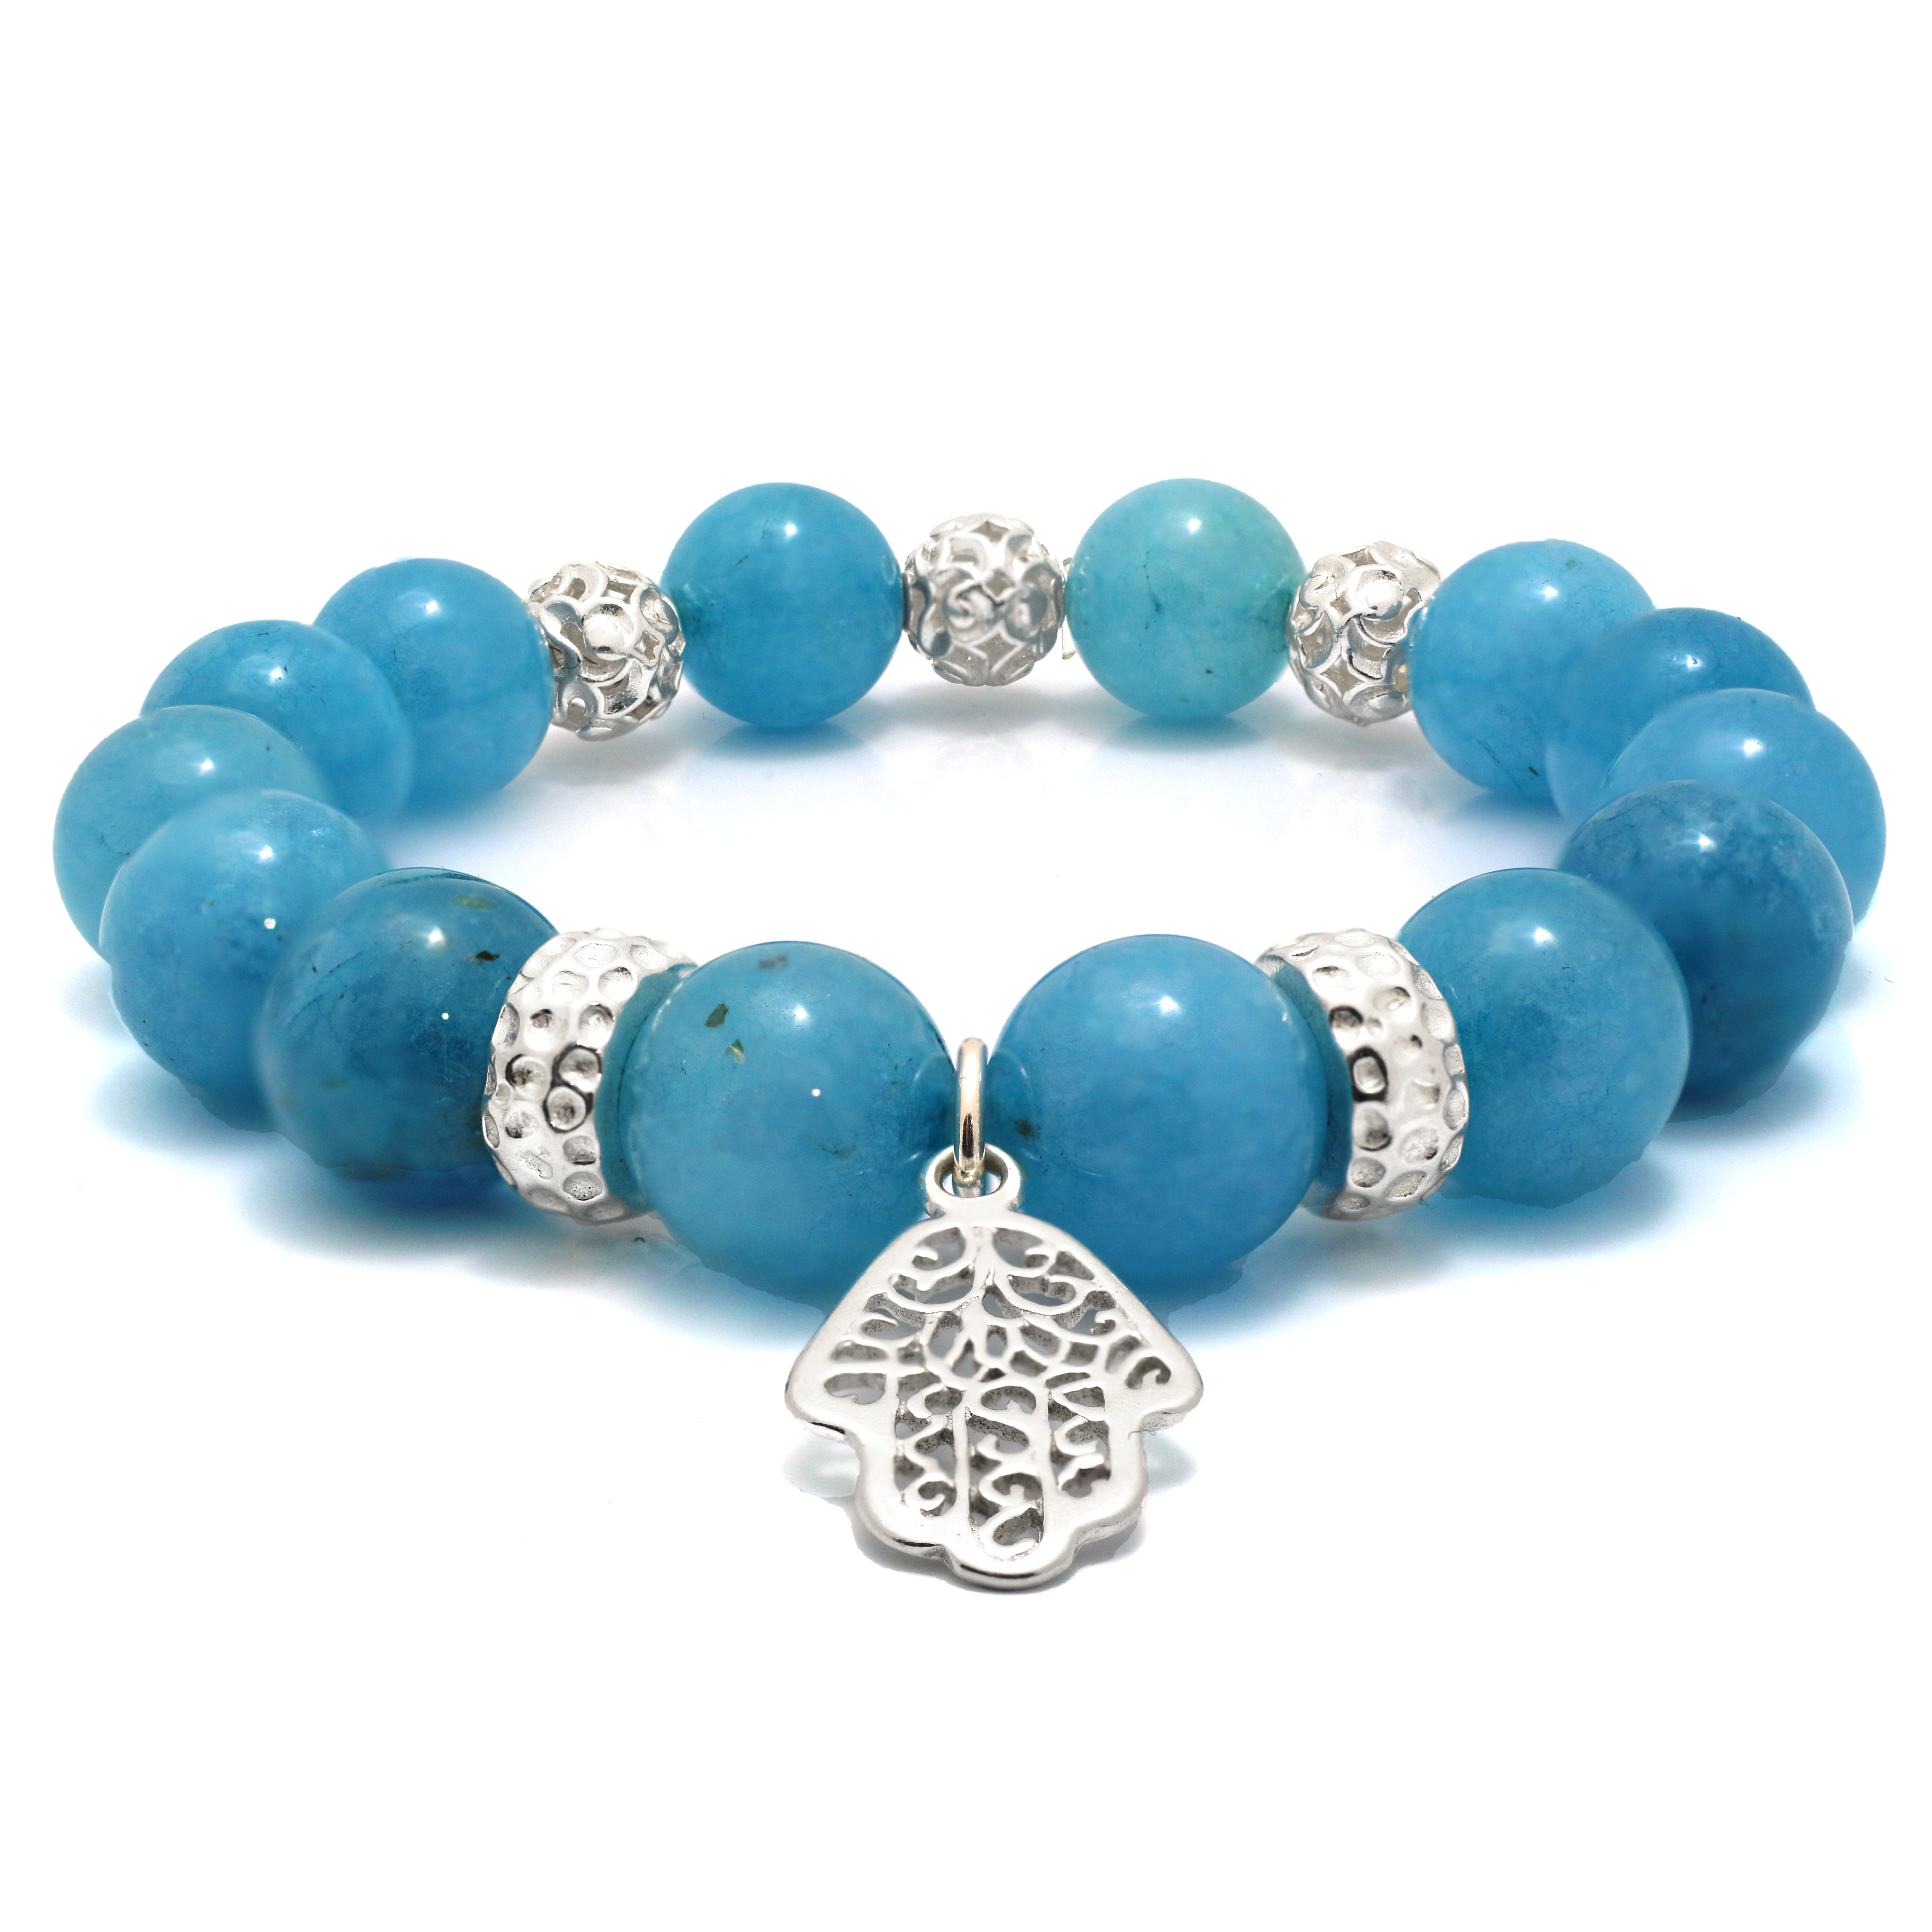 Aquamarine Beaded Bracelet with Silver Spacers and Hamsa Charm